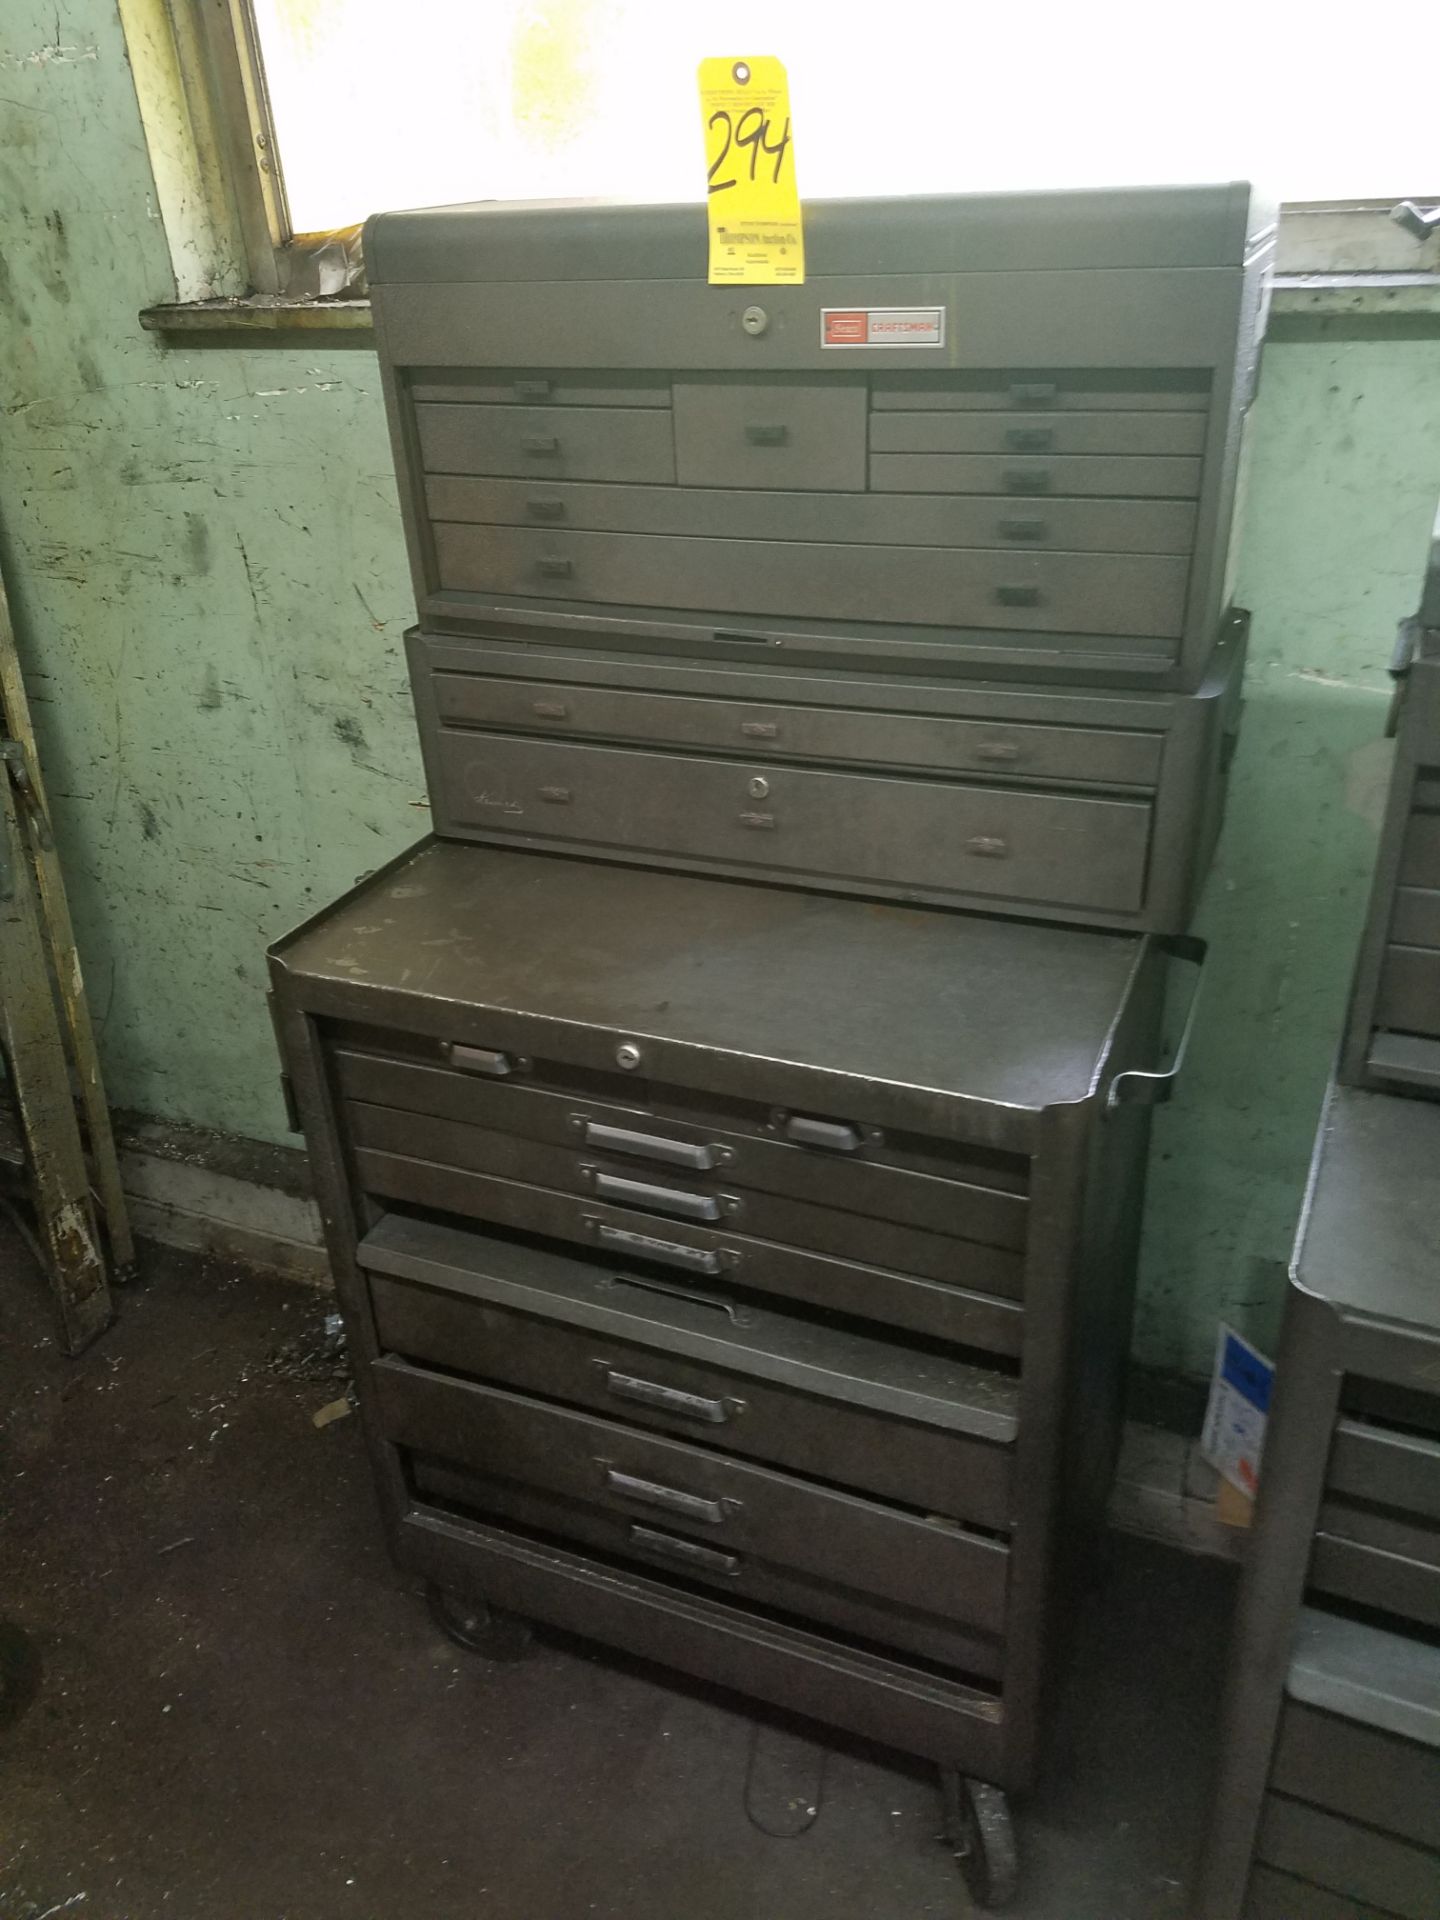 Kennedy and Craftsman Tool Boxes